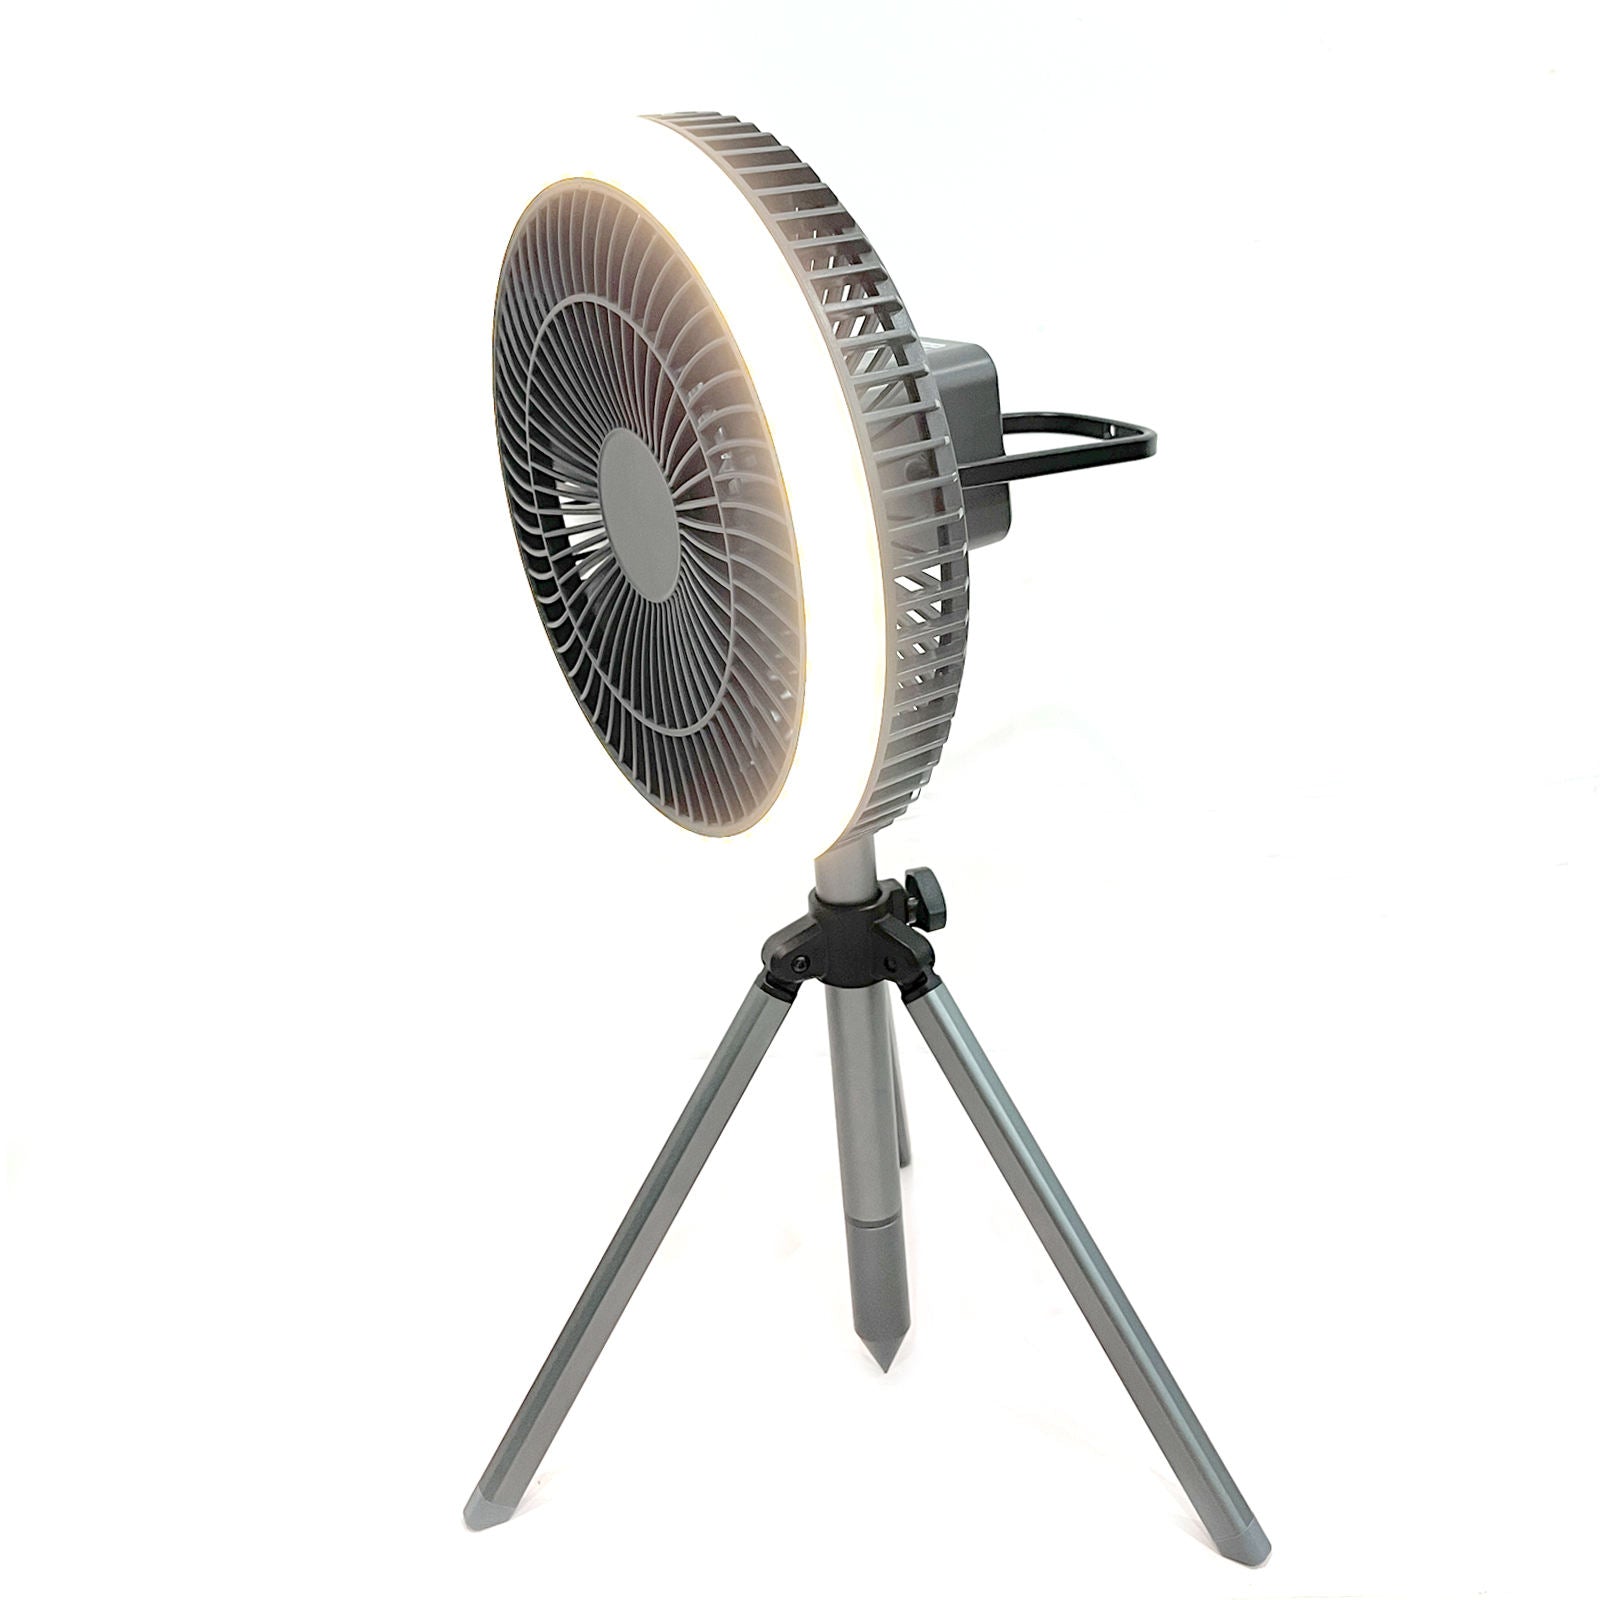 Portable Fan With Light and App Control